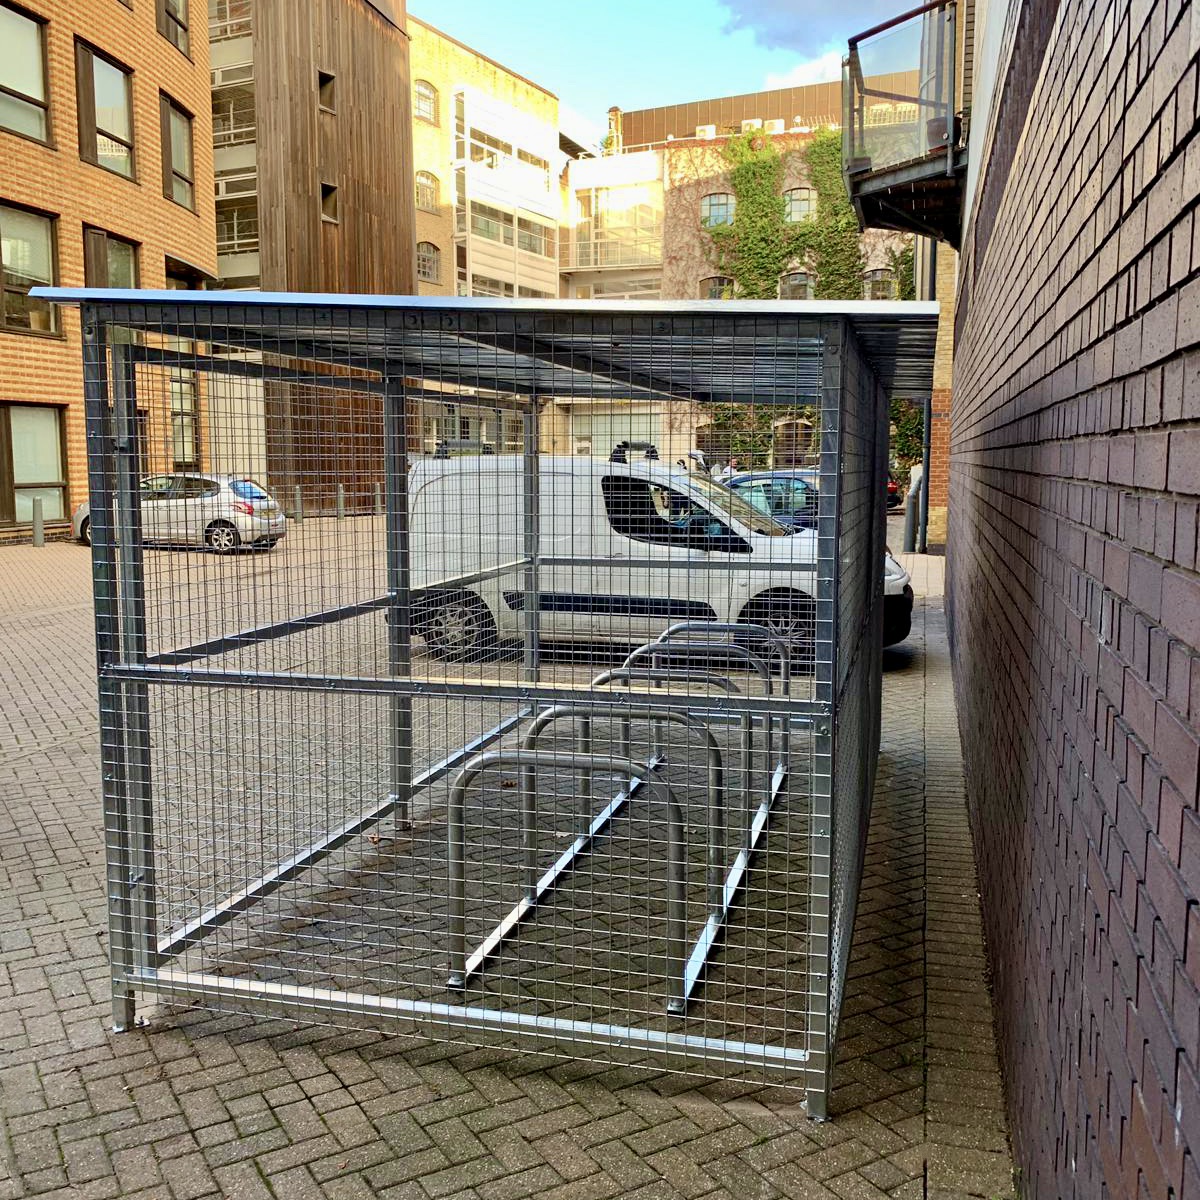 10 space Cambridge Cycle Shelter with toastrack cycle racks